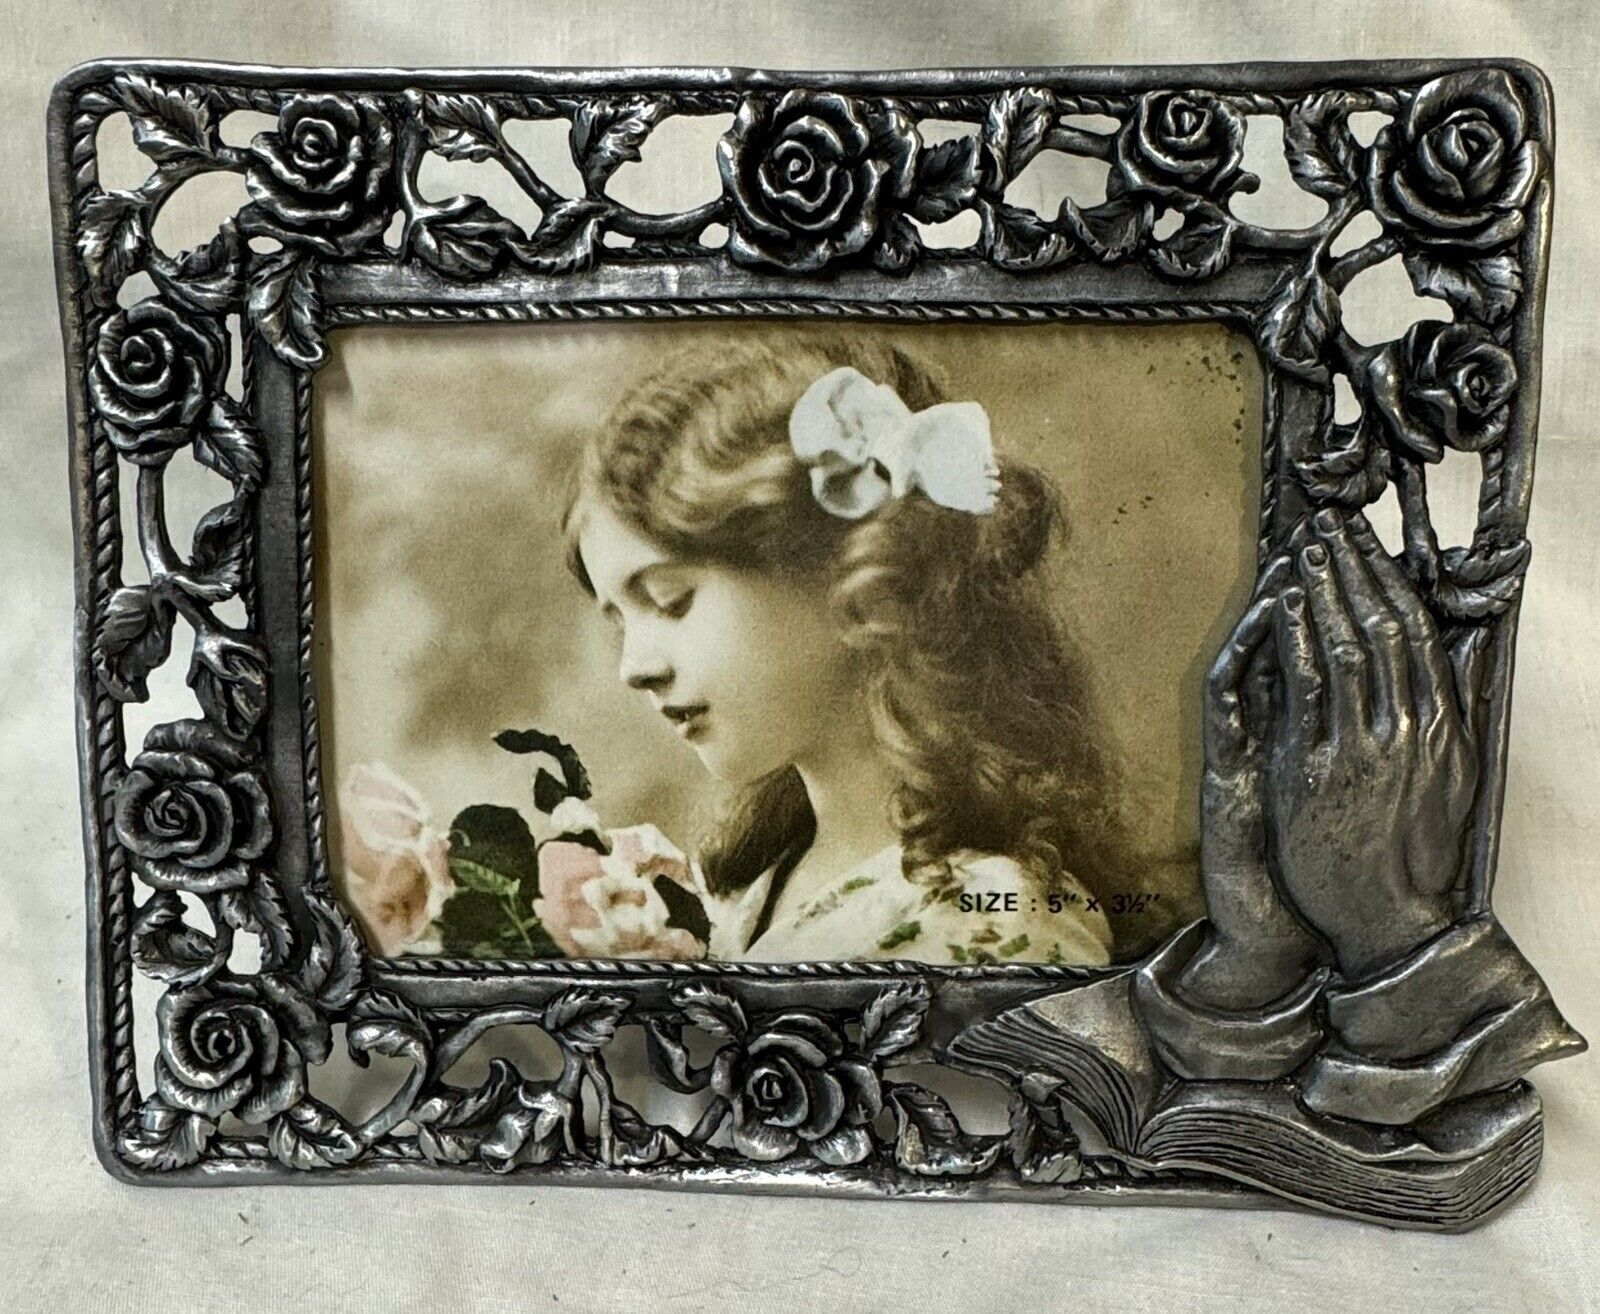 Sun Pewter Praying Hands & Roses Easel Picture Frame 5” x 3-1/2” Photo